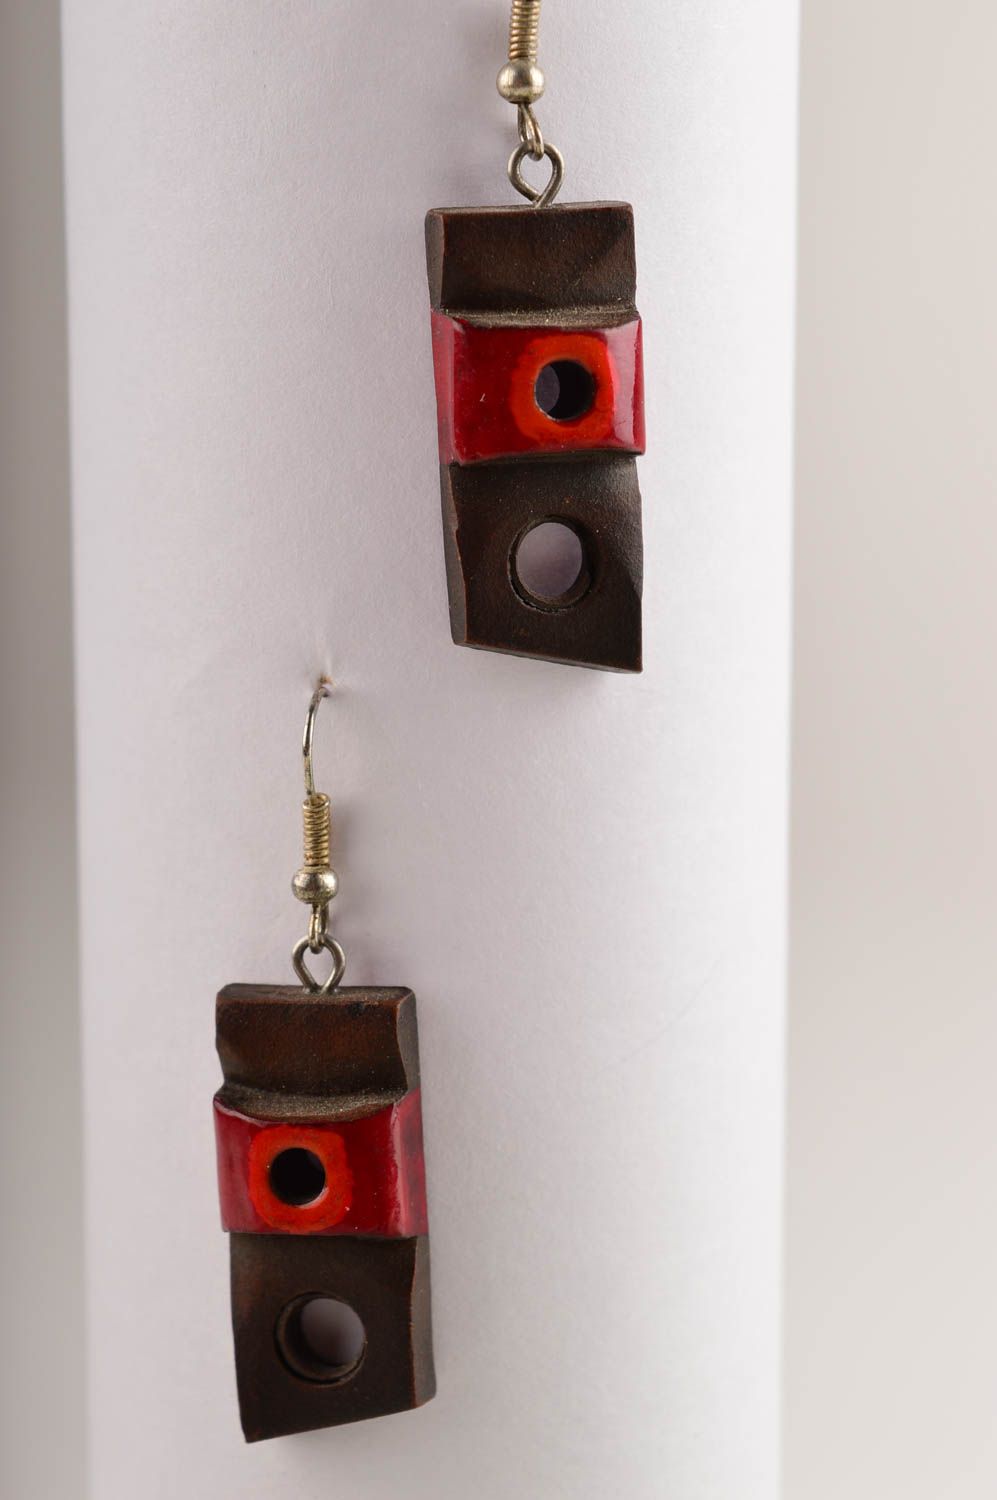 Handmade ceramic earrings designer jewelry fashion accessories gifts for her photo 1